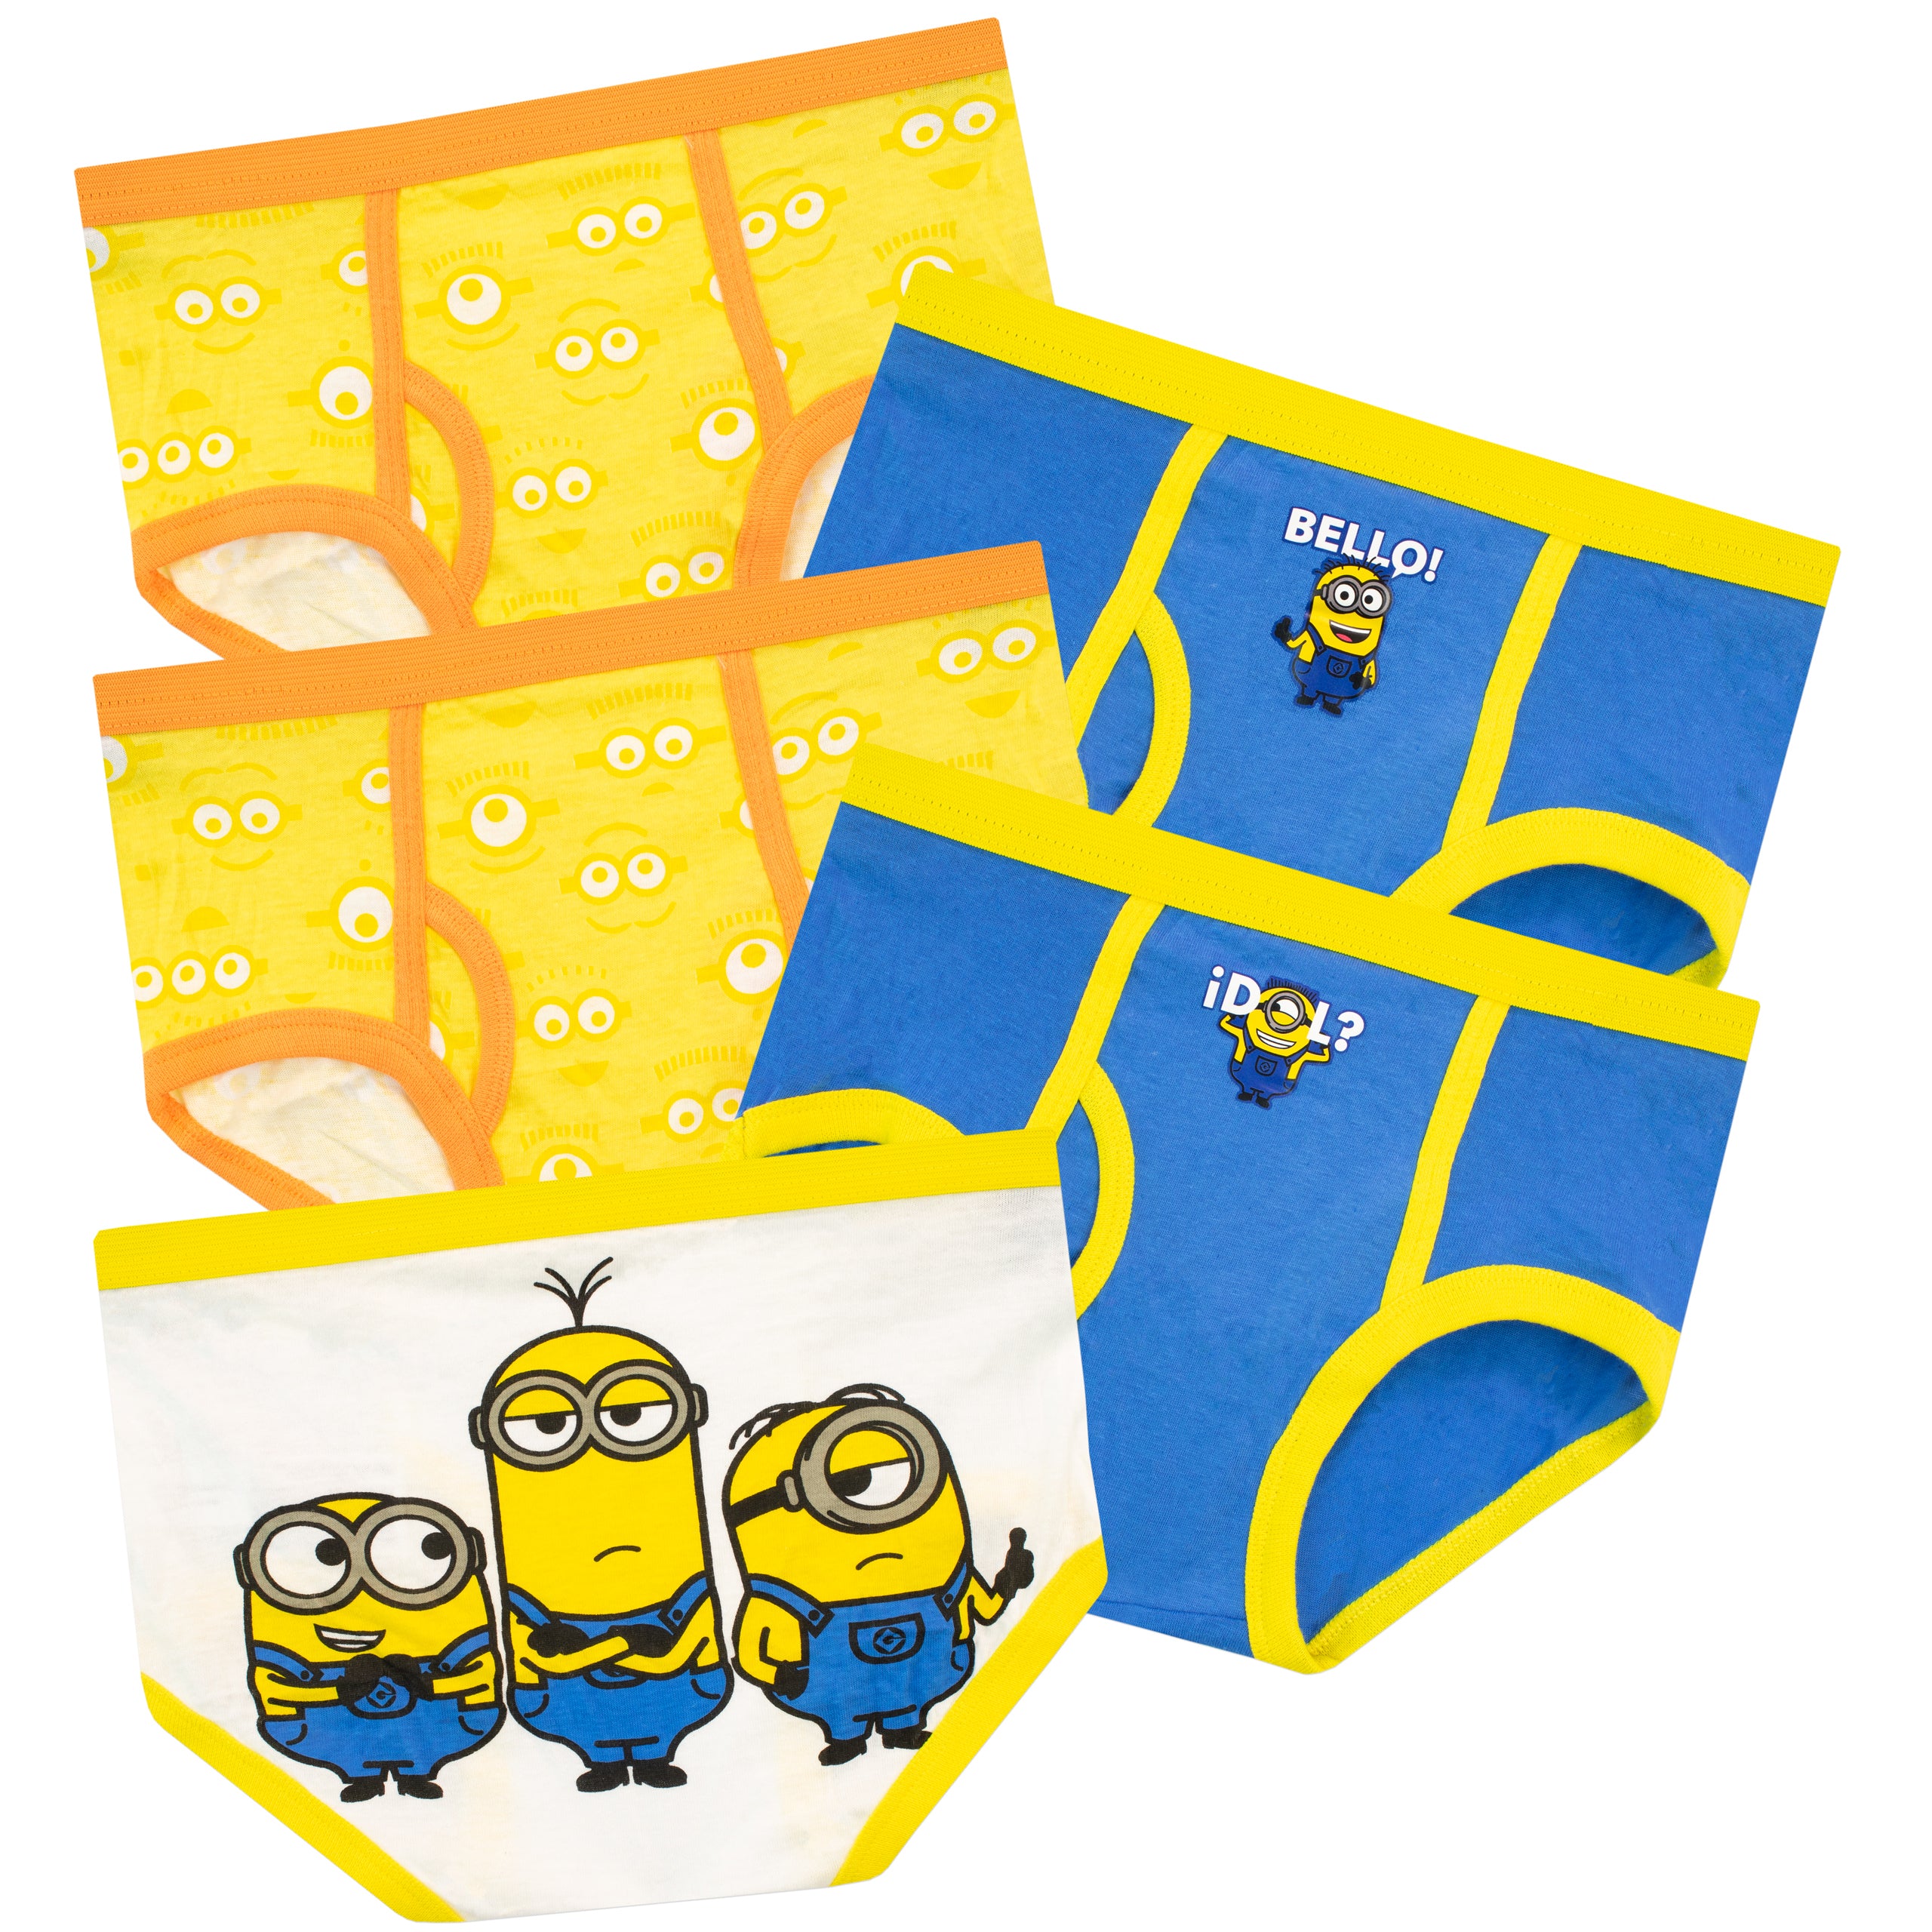 Boys Minions Briefs, set 3 pieces Size 2yrs old Color Colorful